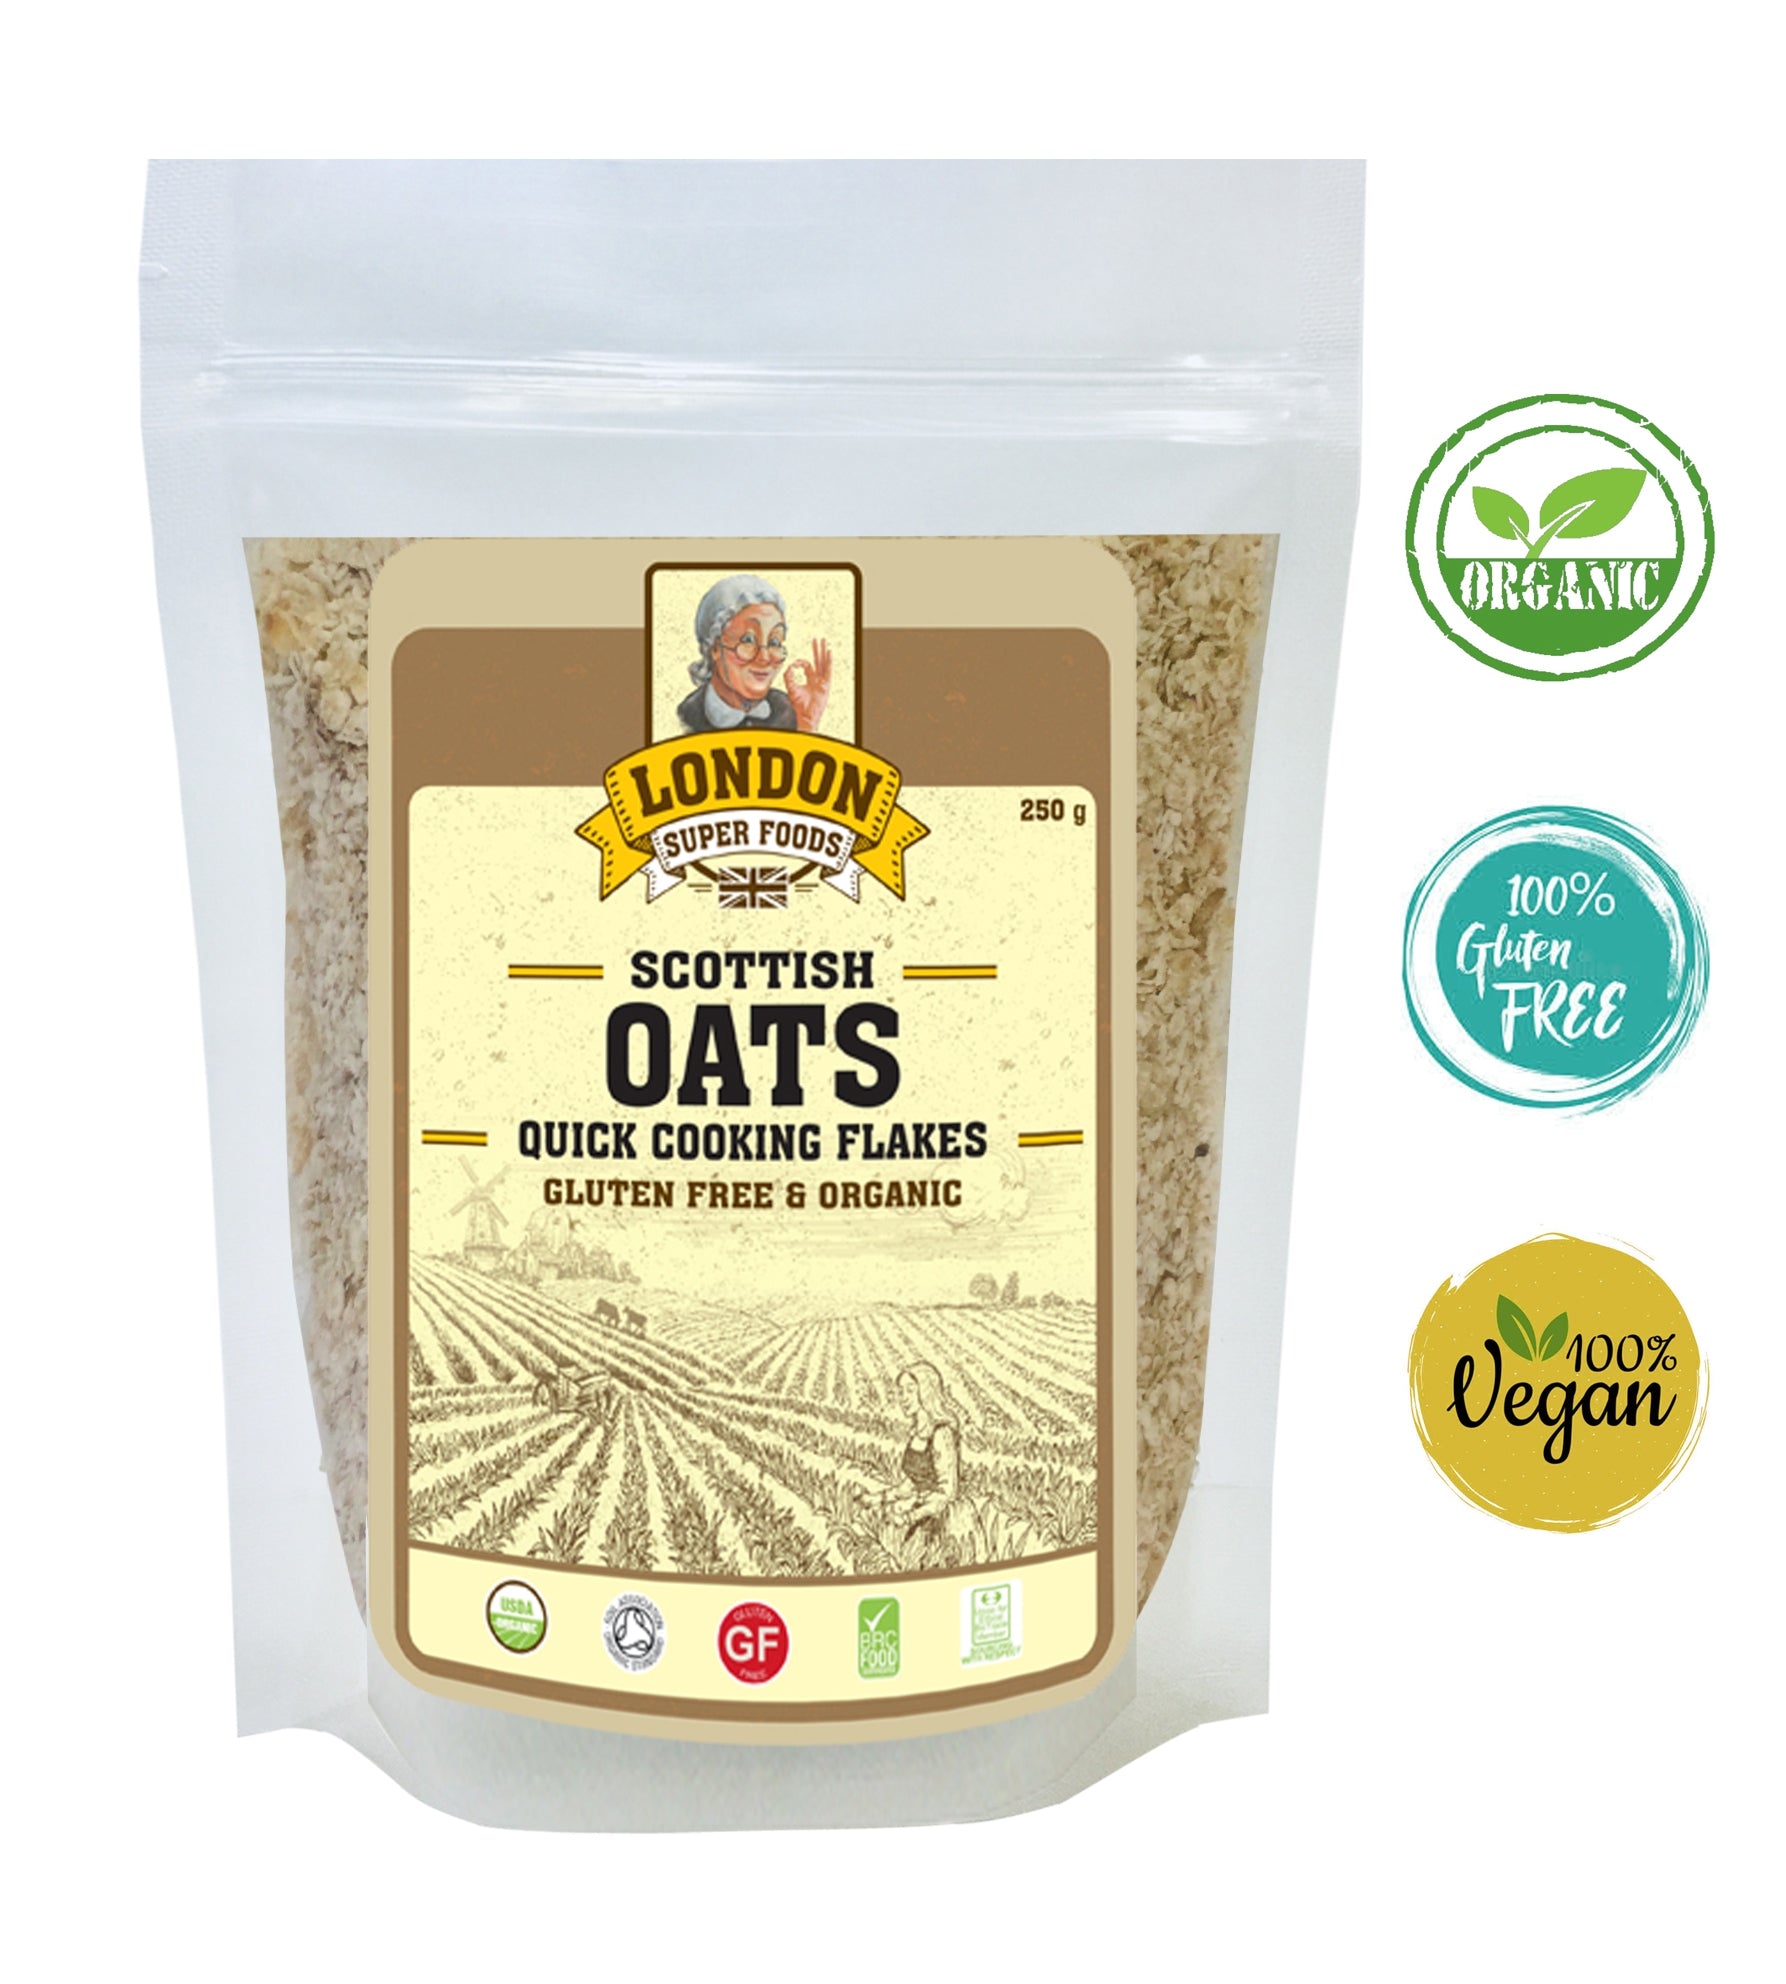 LONDON SUPER FOODS Organic Scottish Oats Quick Cooking Flakes, 250g